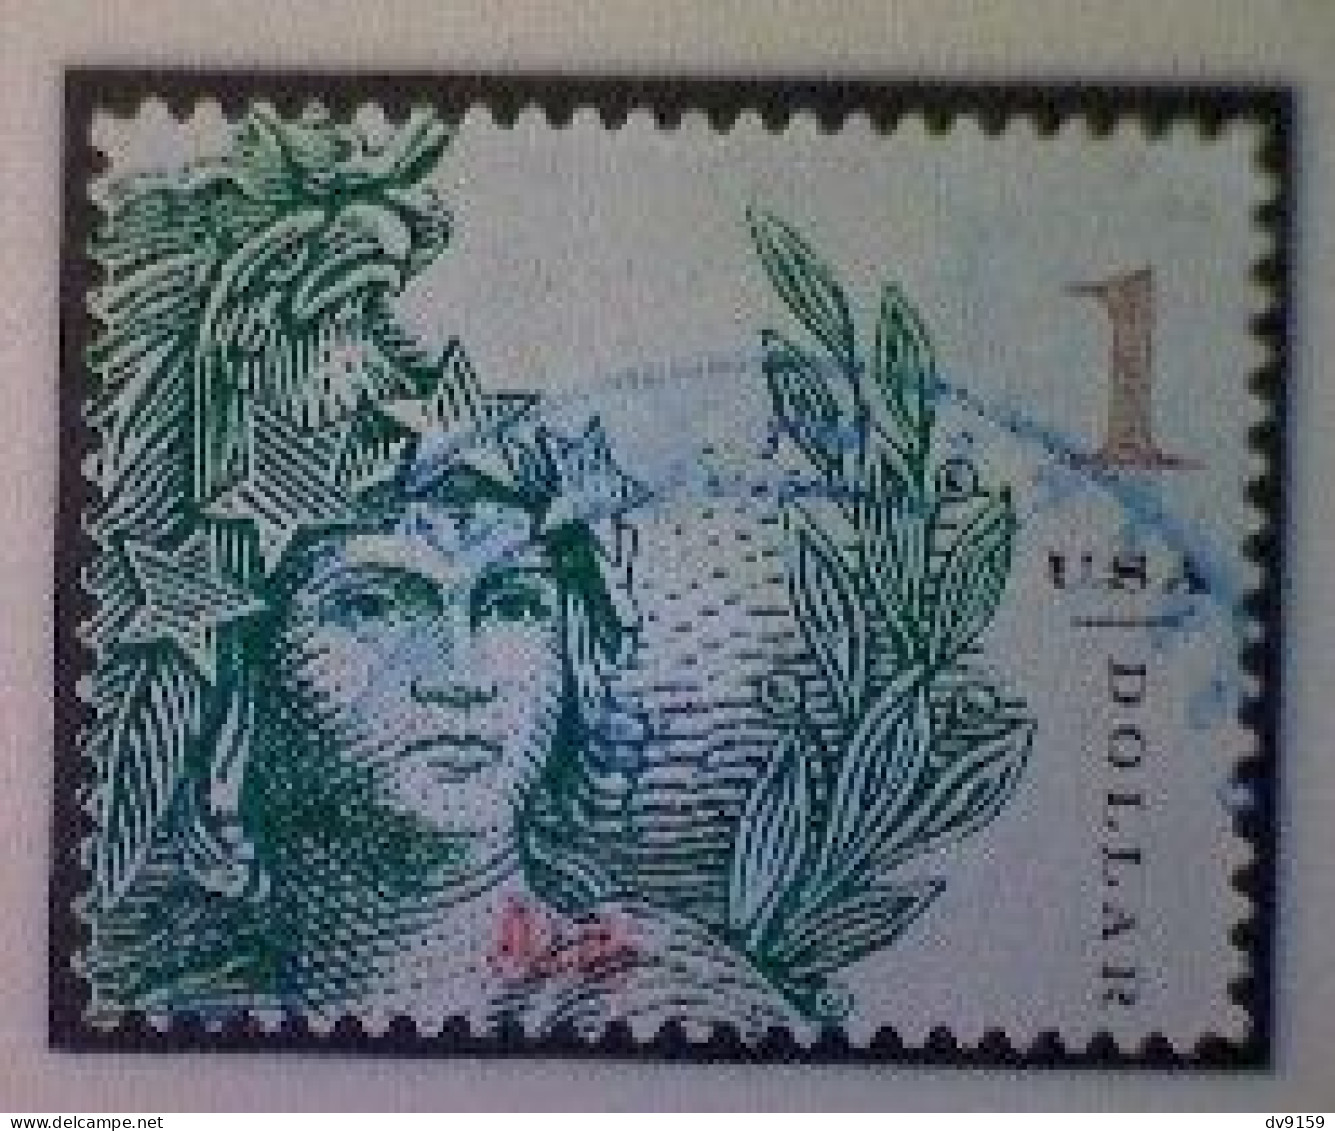 United States, Scott #5295, Used(o), 2018, Statue Of Freedom, $1.00, Emerald - Oblitérés